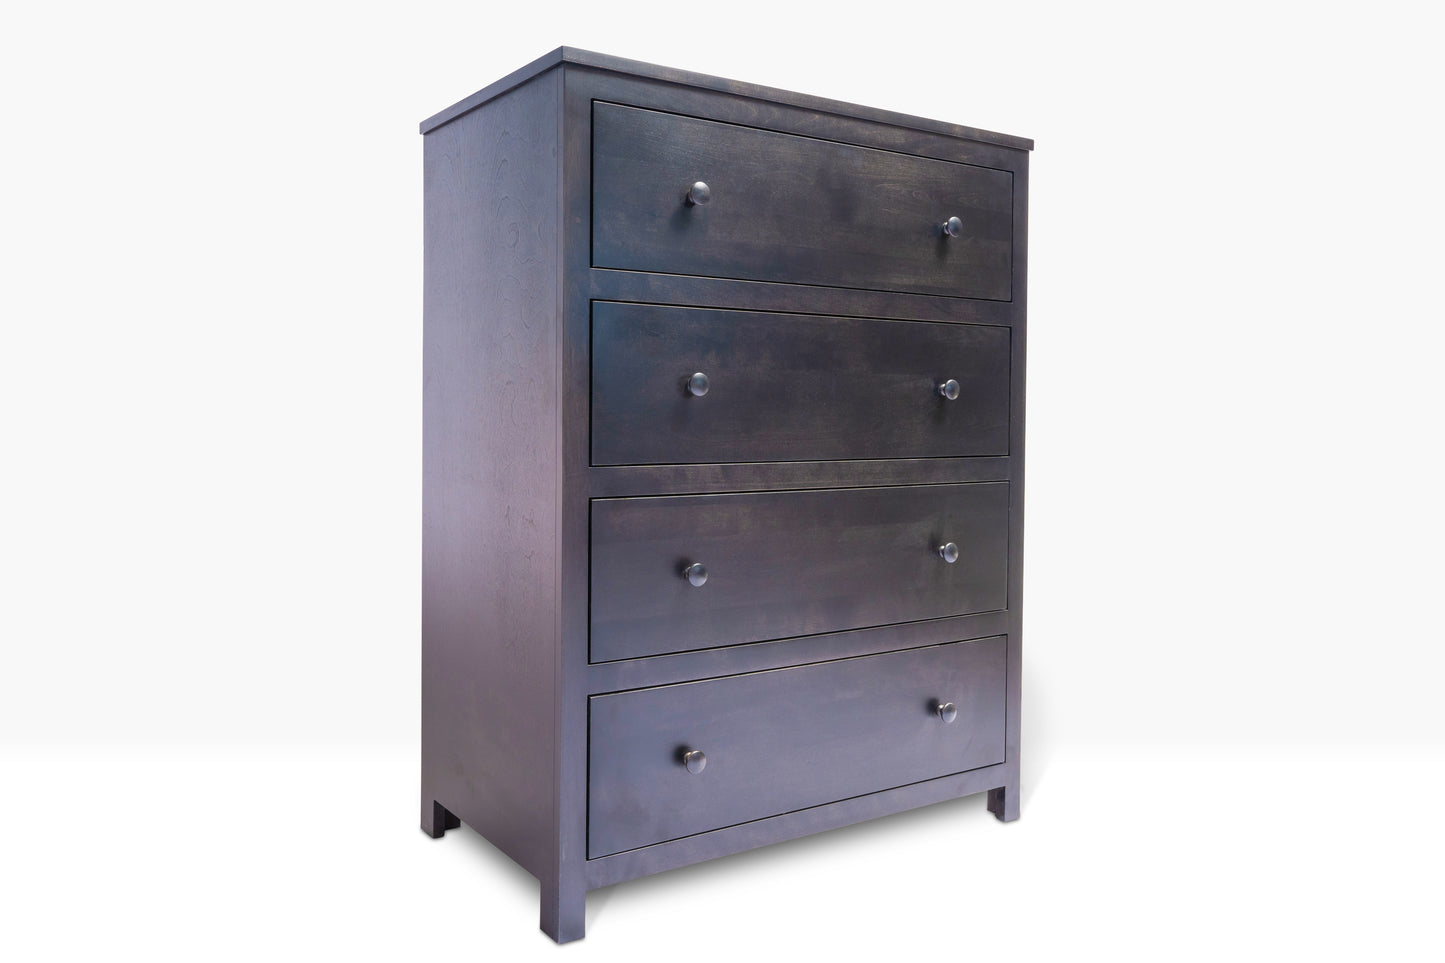 Acadia Tremont Chest in Nitefall finish, with four drawers and hardwood construction.